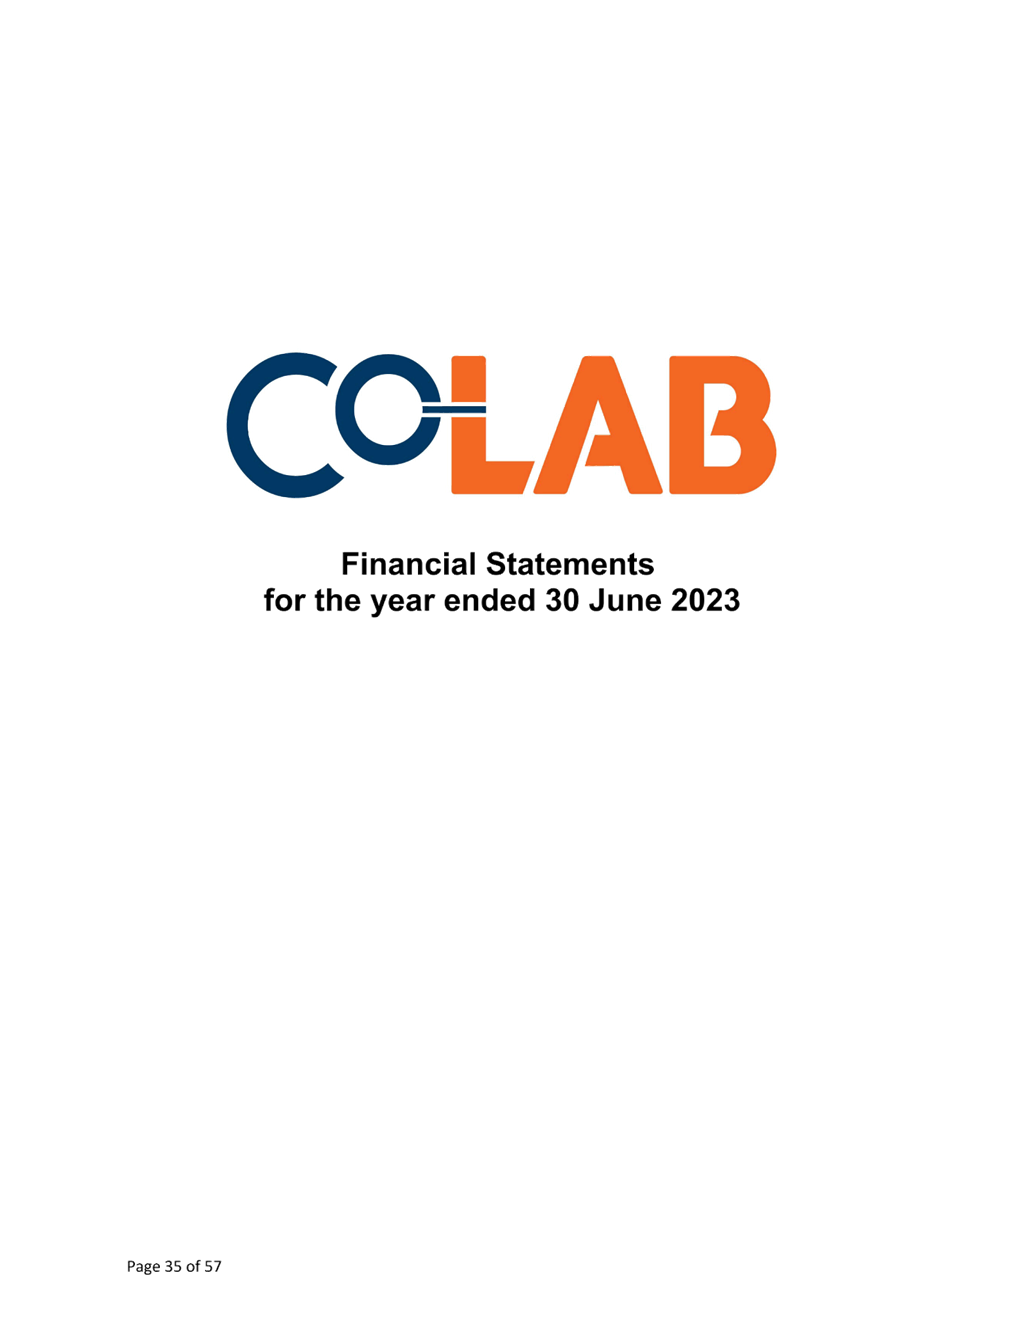 A white background with text and blue and orange letters

Description automatically generated